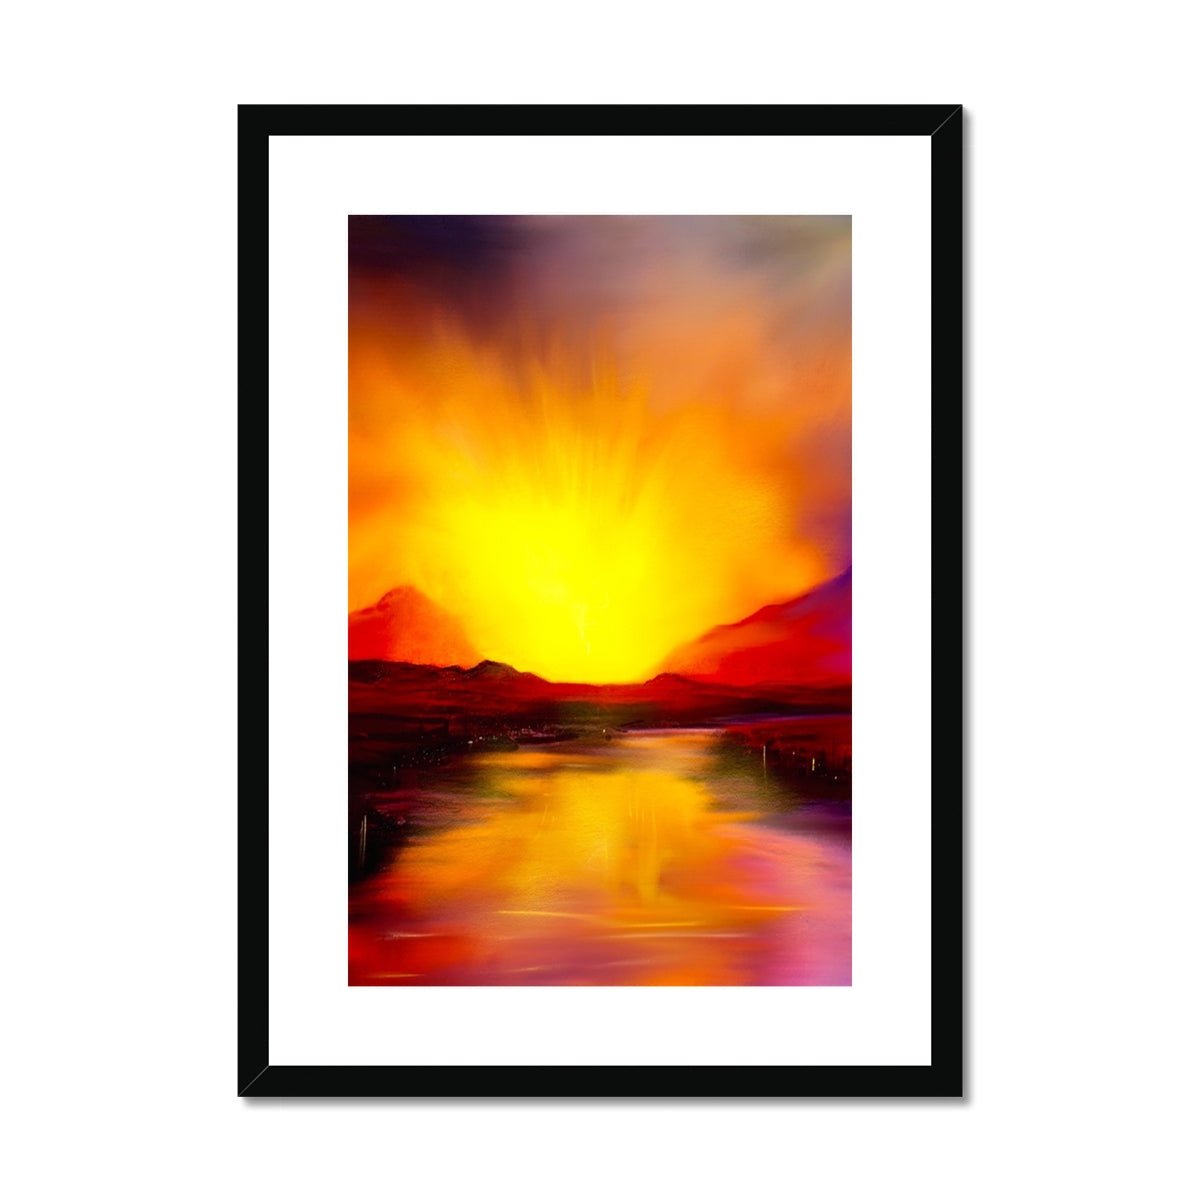 Skye Sunset Painting | Framed & Mounted Prints From Scotland-Framed & Mounted Prints-Skye Art Gallery-A2 Portrait-Black Frame-Paintings, Prints, Homeware, Art Gifts From Scotland By Scottish Artist Kevin Hunter